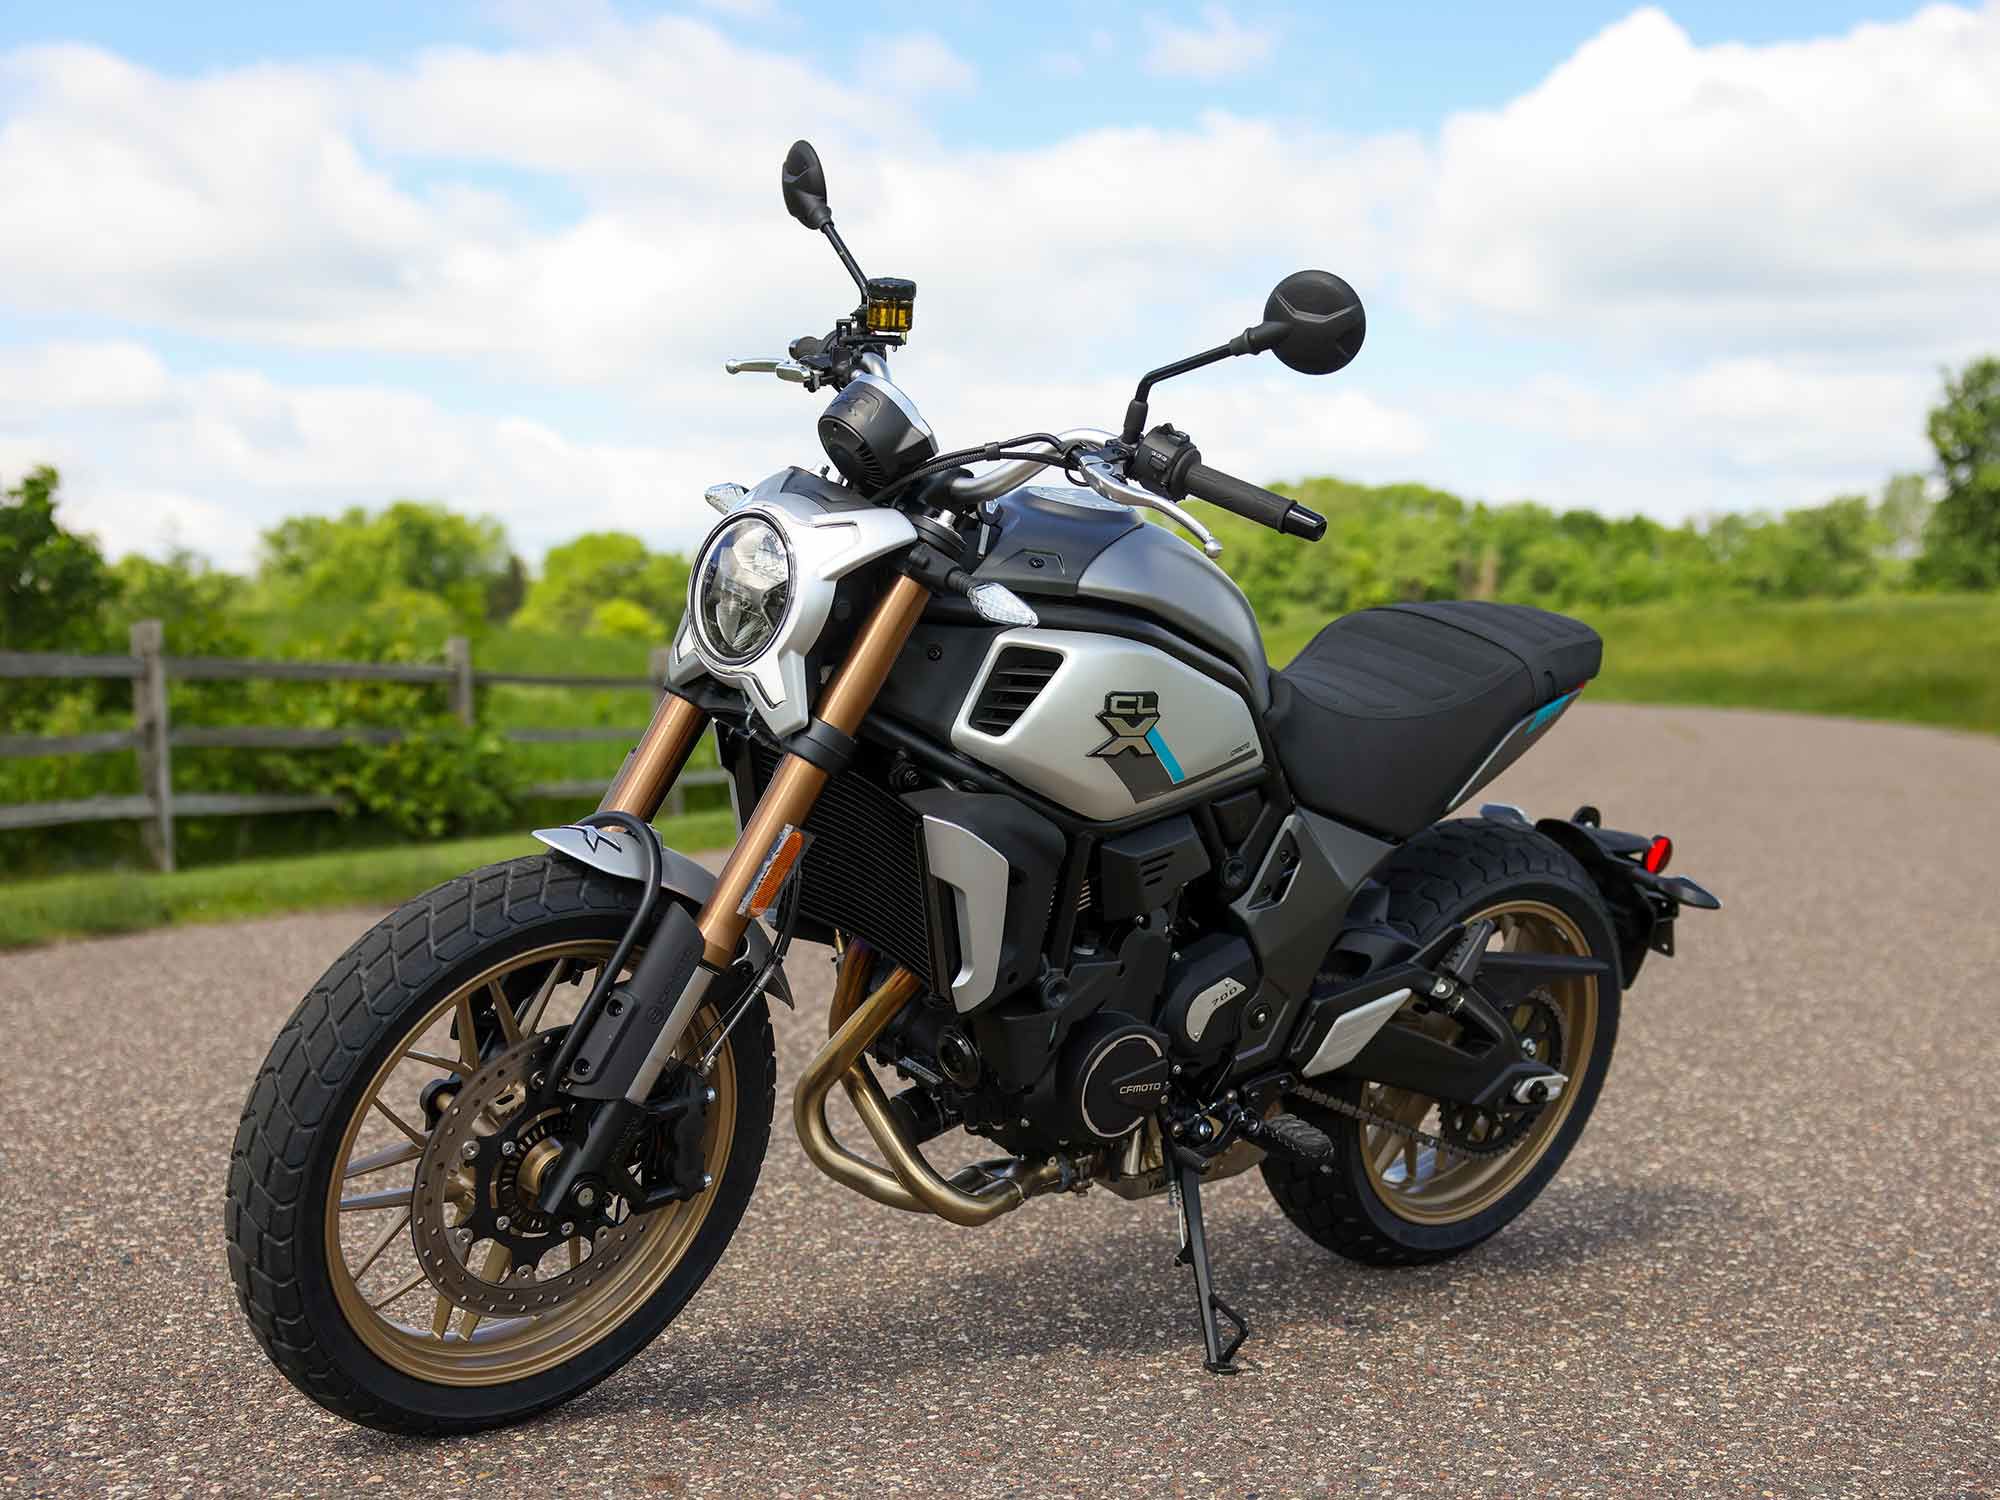 The 700CL-X runs a staggered 18/17-inch wheel combo, compared to the Sport’s even 17-inchers, and standard bars for a more upright seating position.